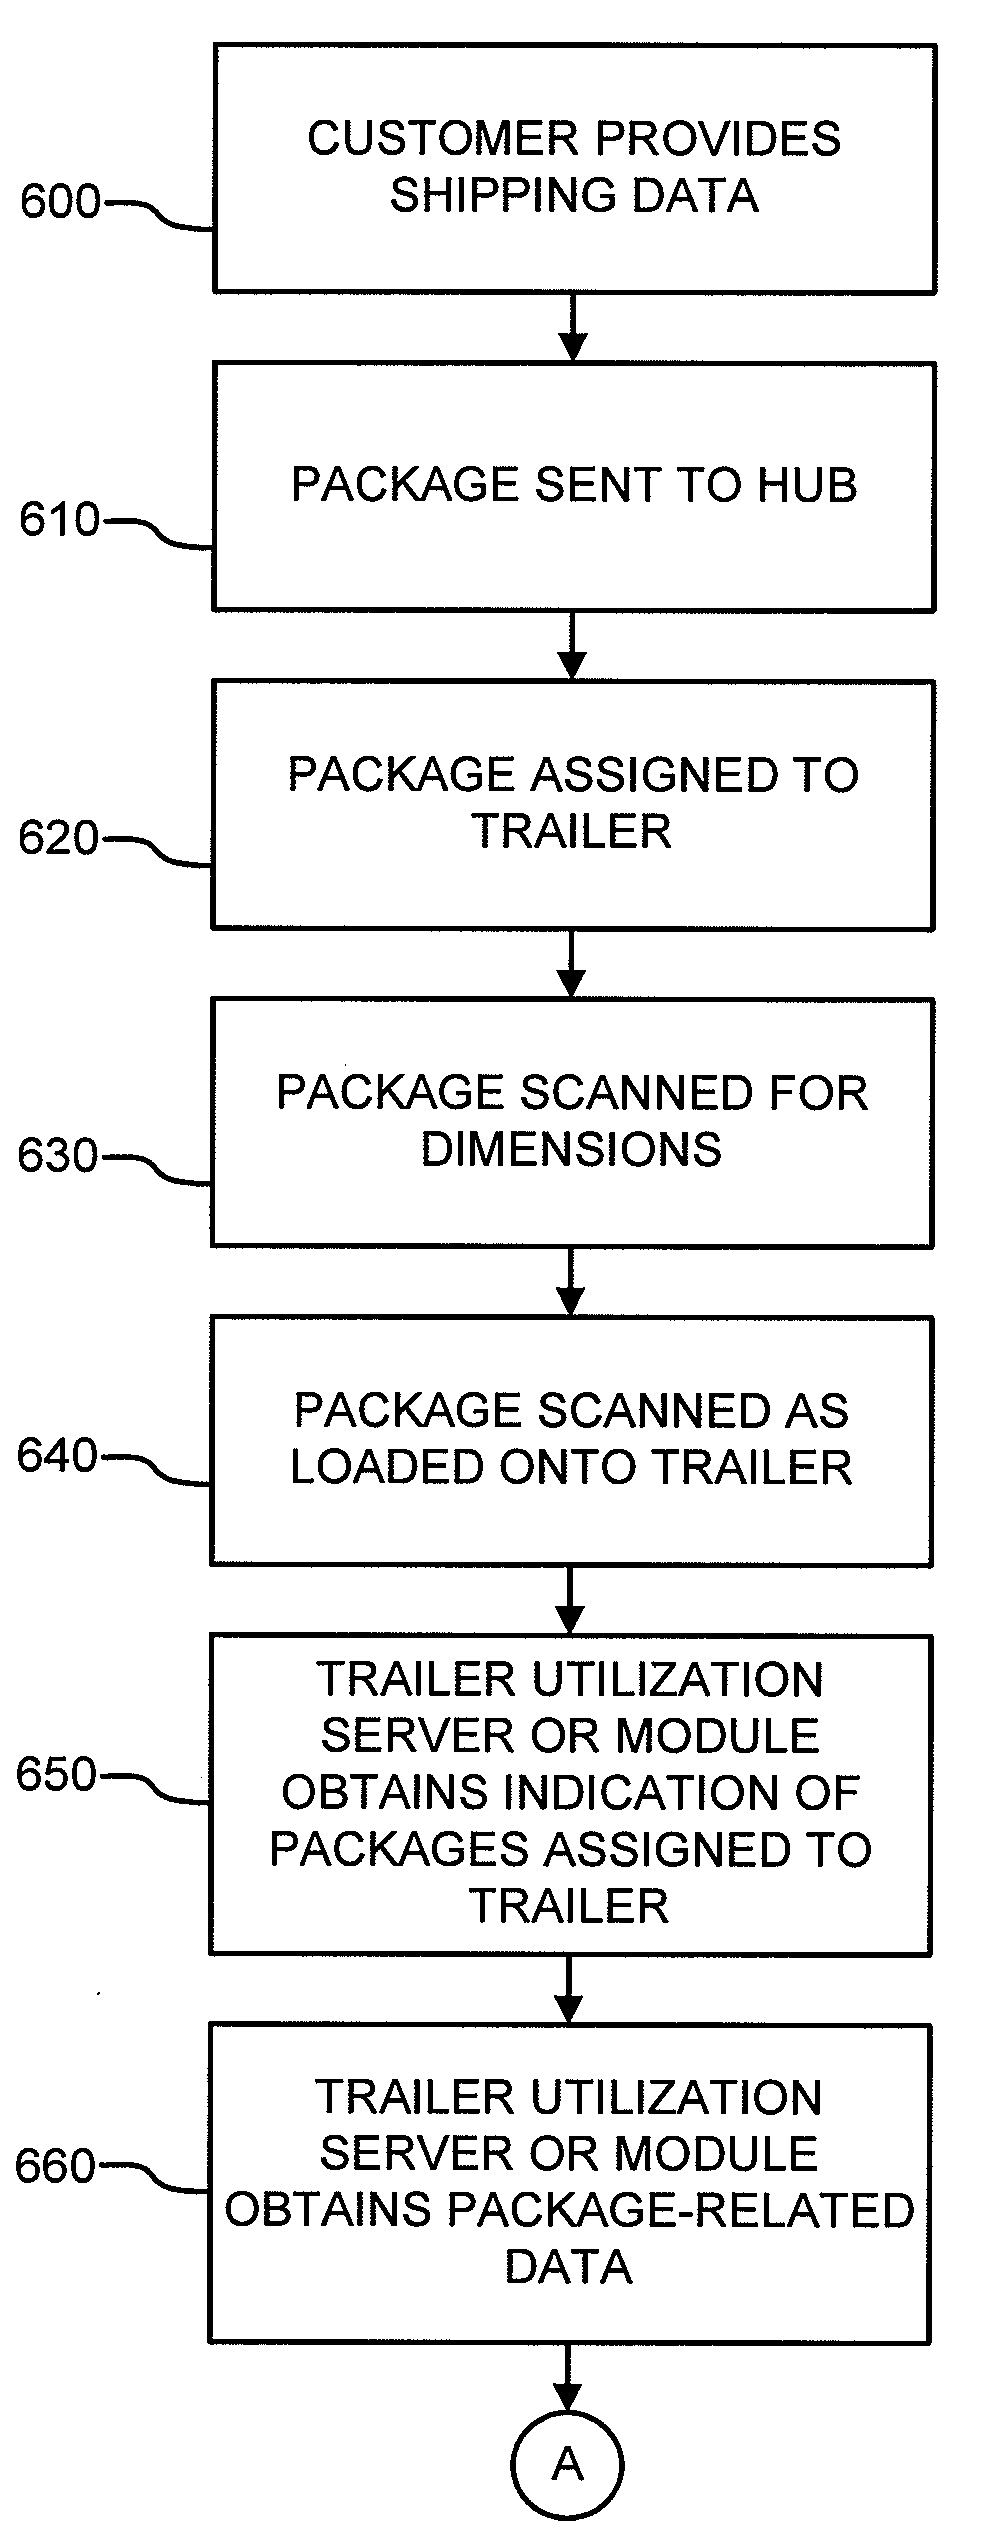 Trailer utilization systems, methods, computer programs embodied on computer-readable media, and apparatuses